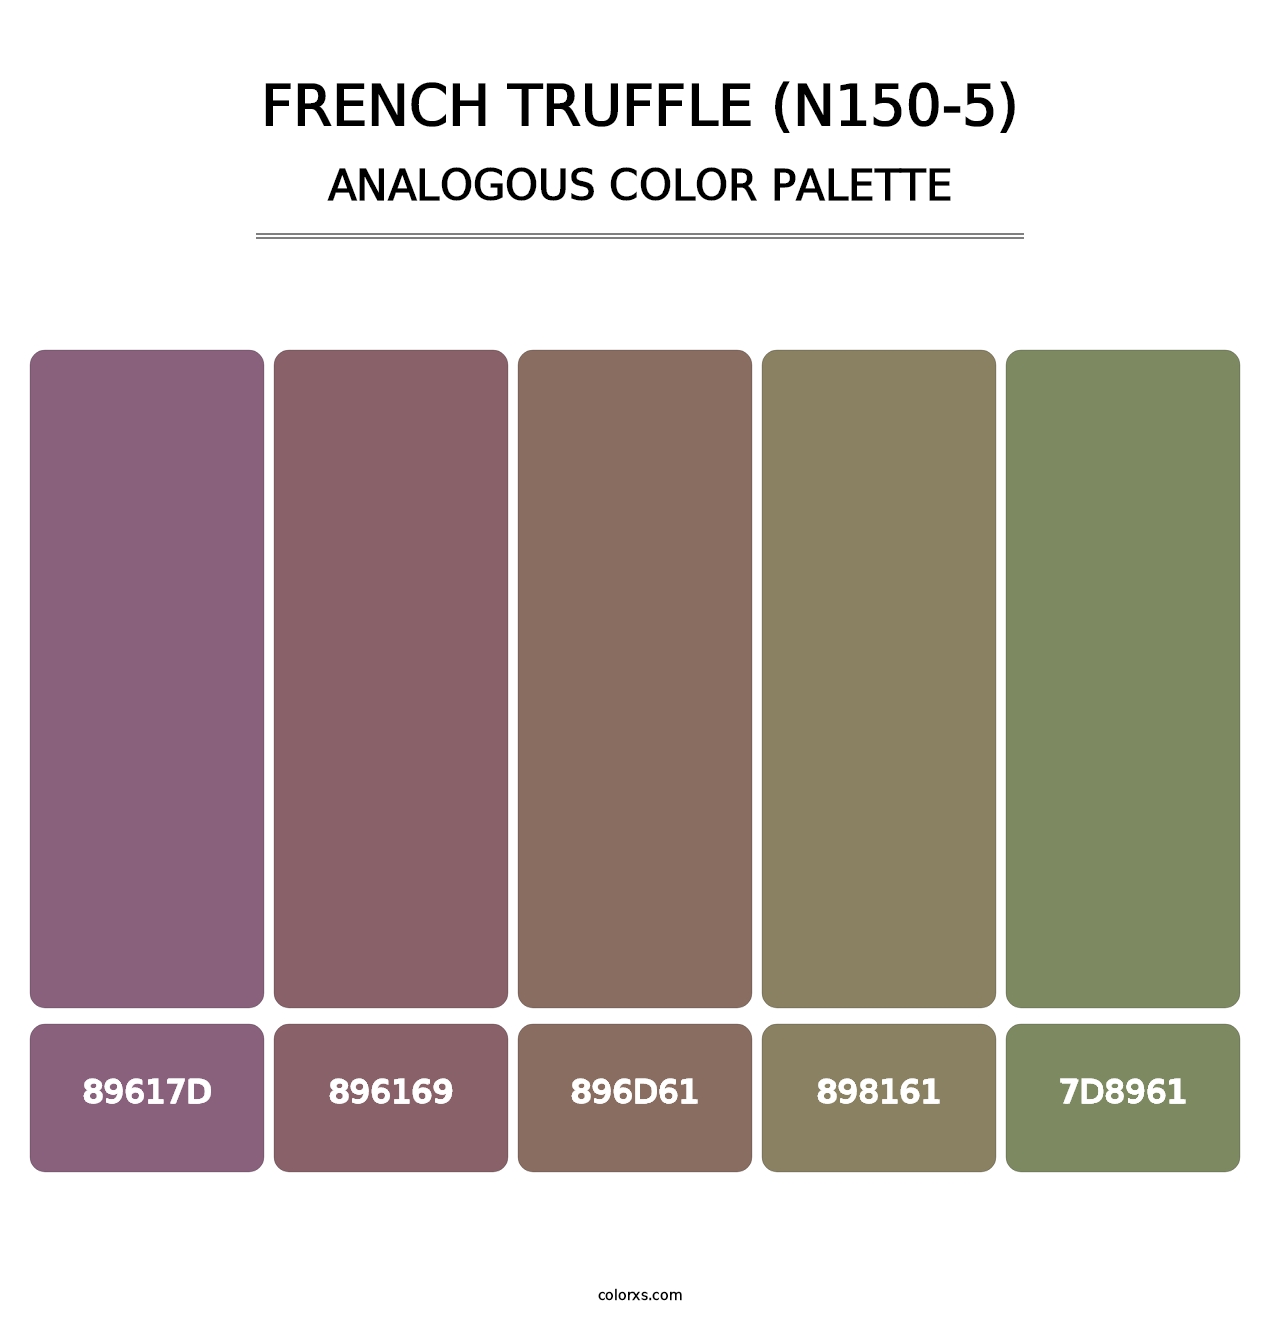 French Truffle (N150-5) - Analogous Color Palette